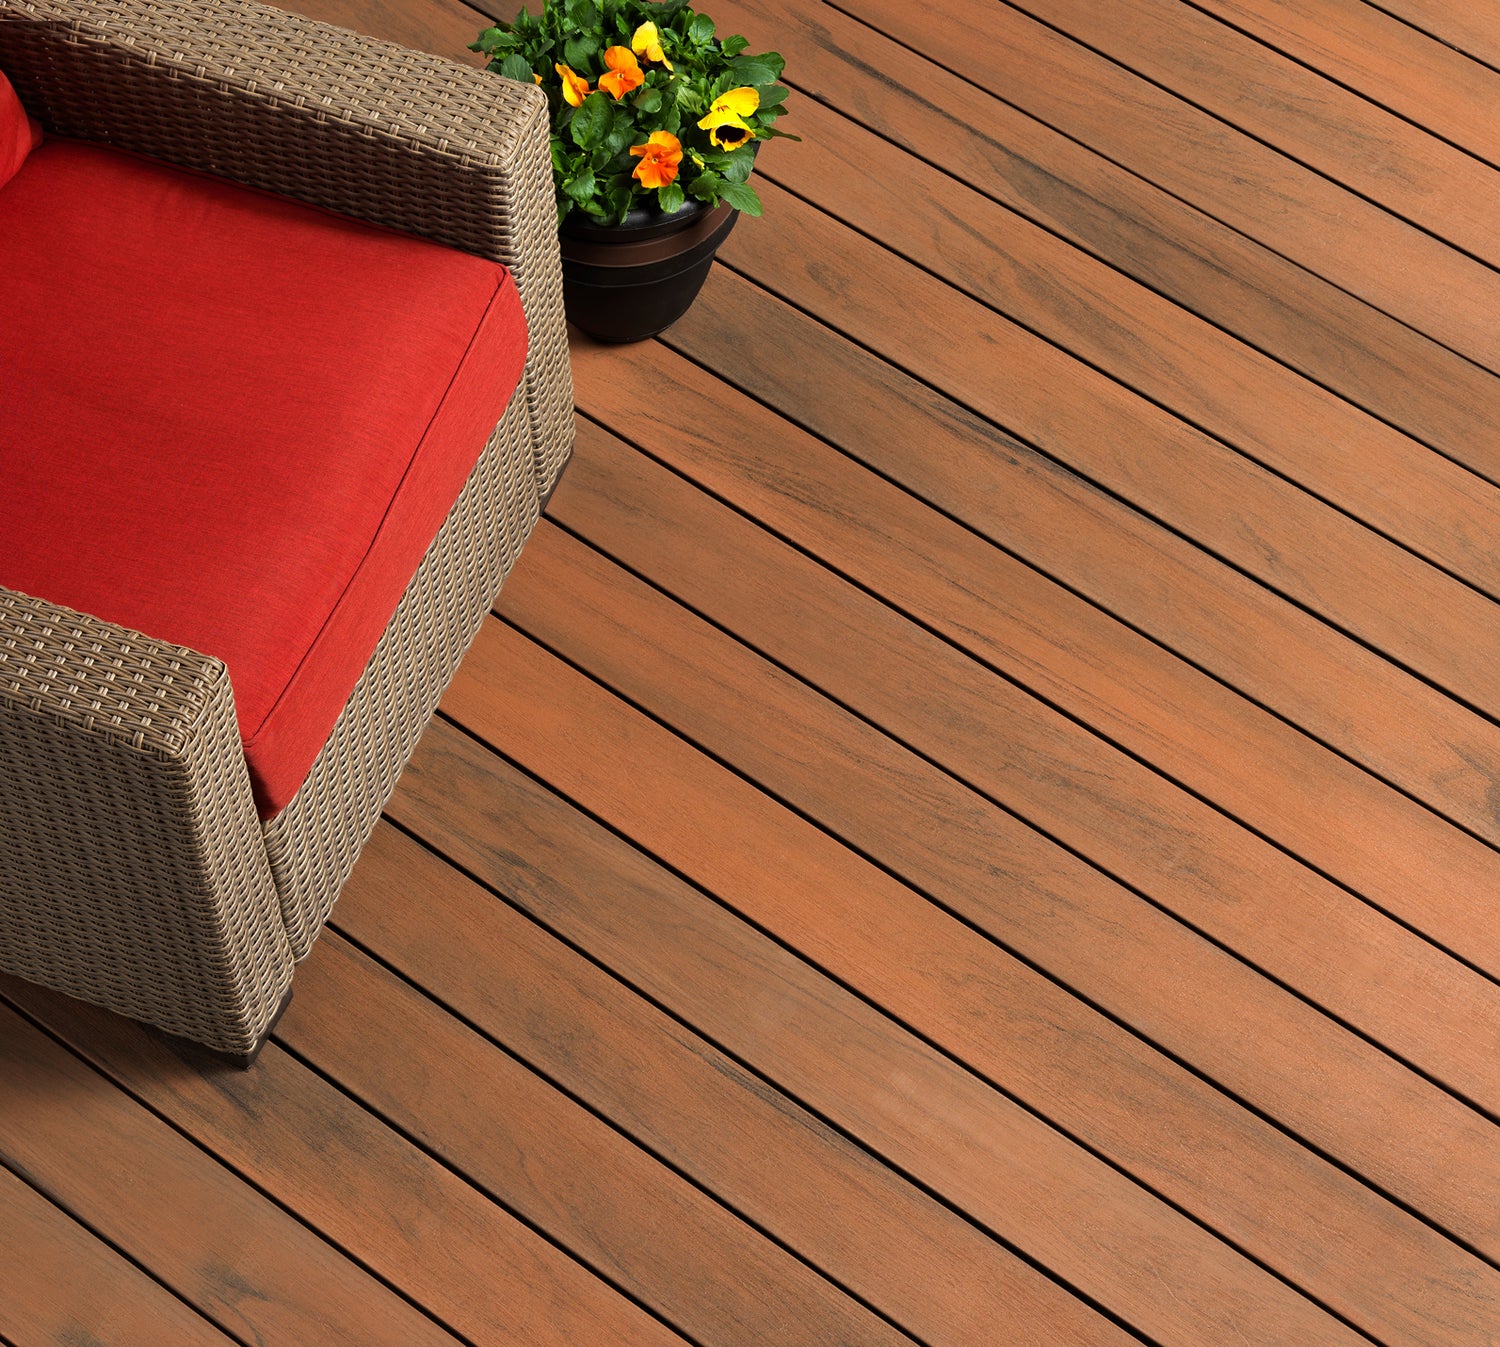 TruNorth Tigerwood deck with red wicker chair